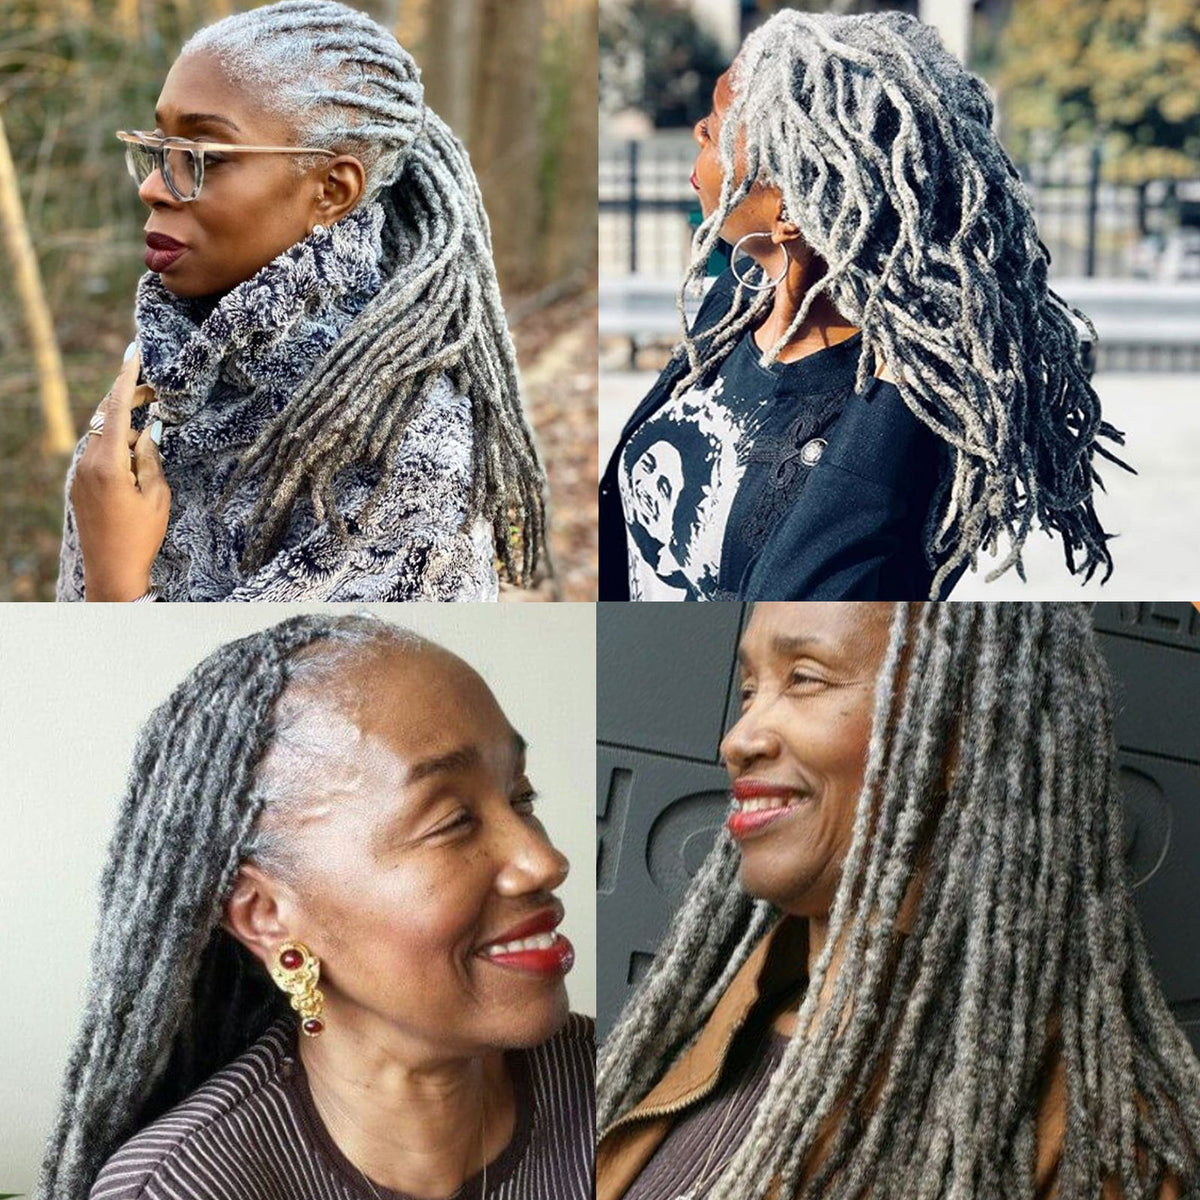 8 Inch 0.4cm 10 Strands Natural Human Hair Loc Extensions Handmade 100% Human Hair Dreadlock Extensions Bundle Dreads Extensions For Woman & Men Can Be Dyed/Bleached (Gray)